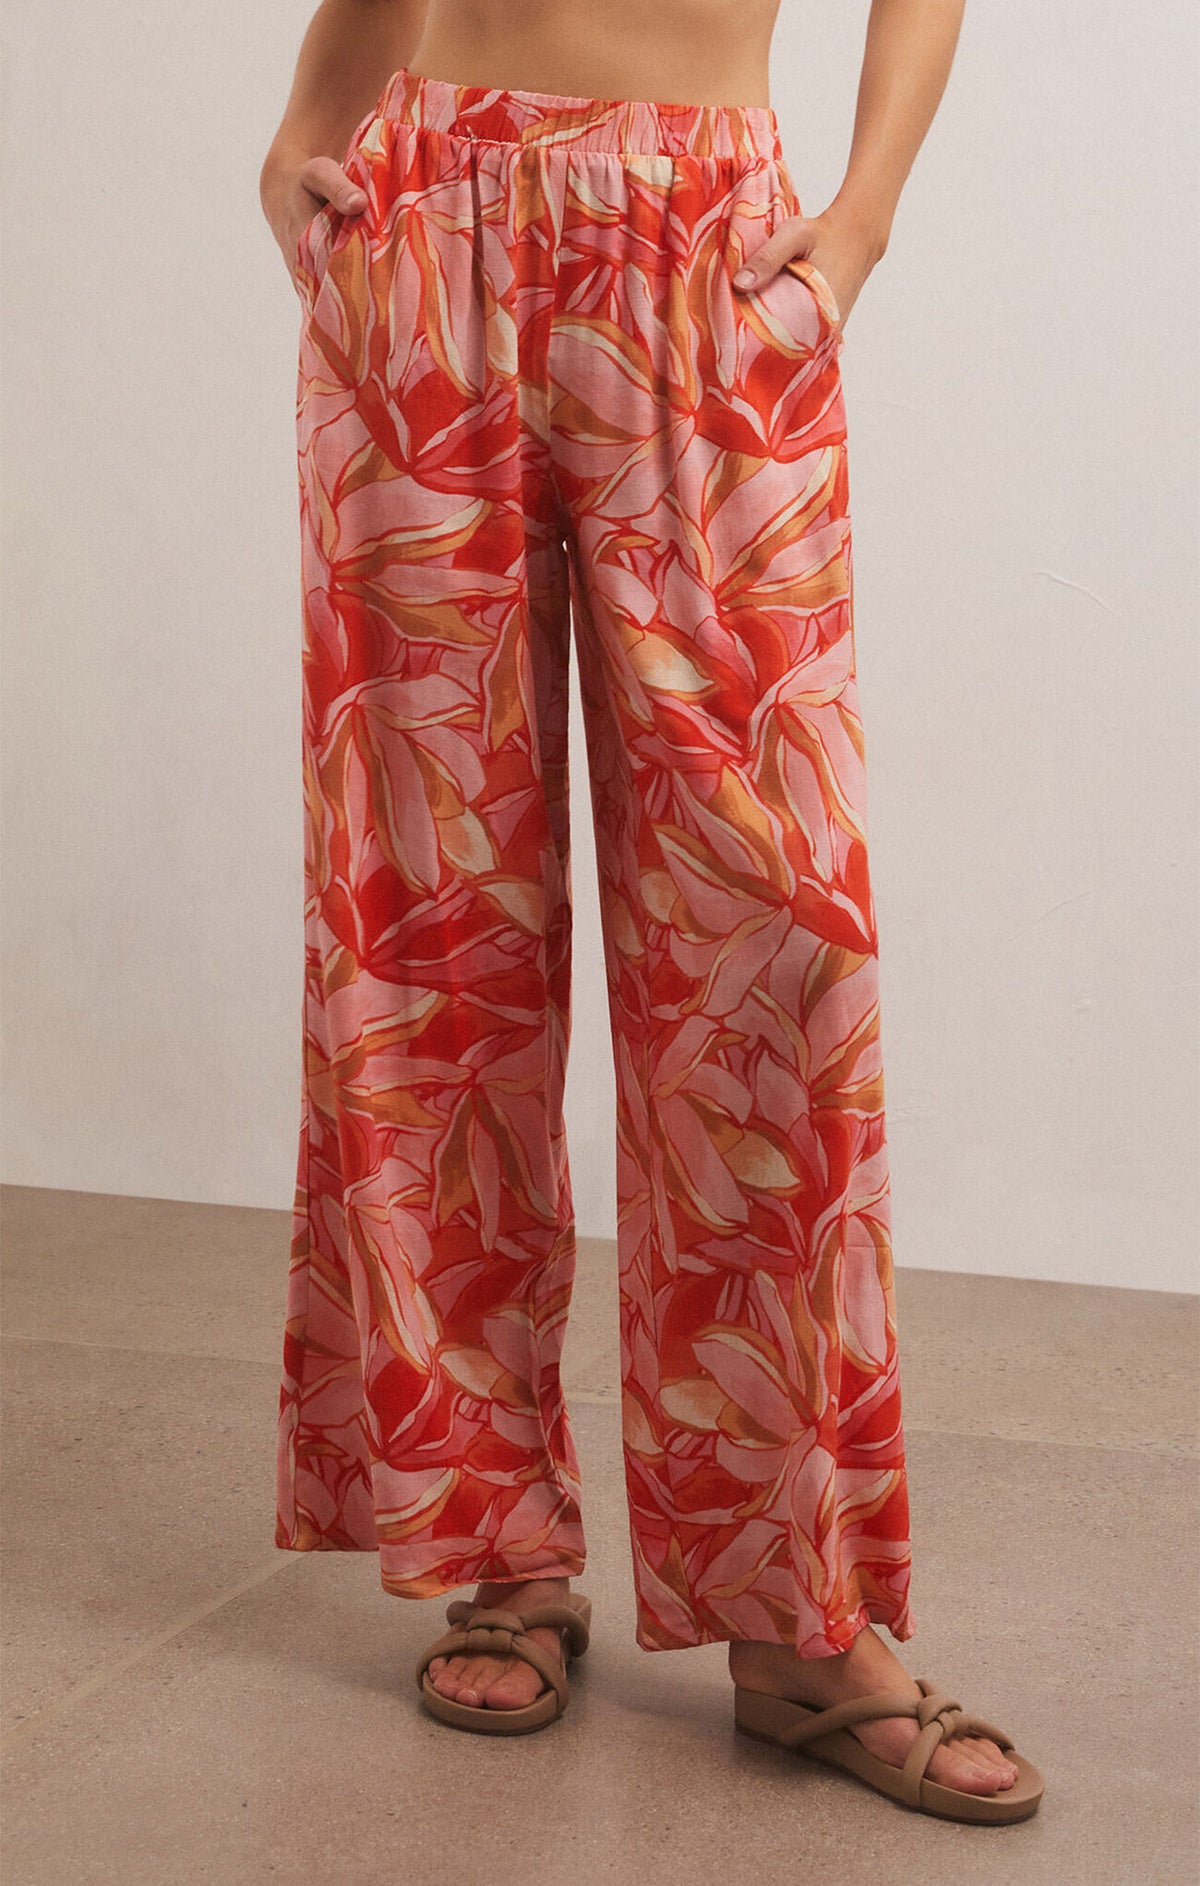 Charmaine Stained Glass Pant - junglefunkrecordings